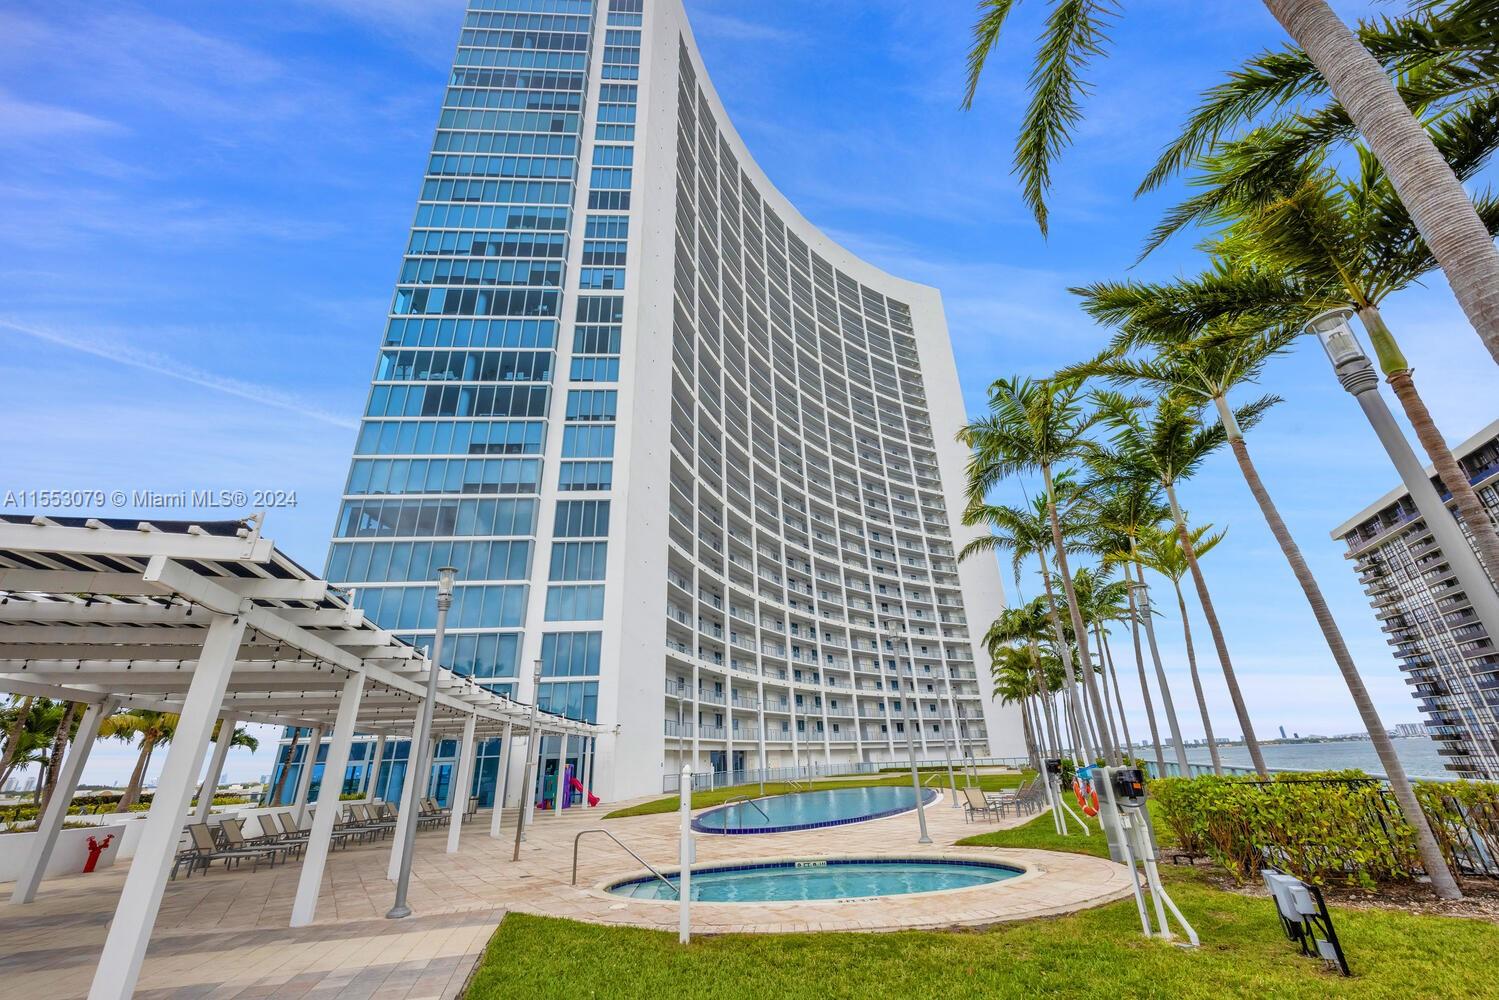 Immerse yourself in luxury with this exclusive Miami waterfront condo in the prestigious 12 line. This 1,870 sqft corner unit features 2 beds & 3 baths, offering panoramic 270-degree views of Biscayne Bay, Miami Beach, & the city skyline via expansive floor-to-ceiling windows. The open layout showcases an Italian kitchen with granite countertops, S/S appliances, marble floors, custom closets, & renovated bathrooms. Opt for partially furnished or vacant spaces, complete with premium fixtures, in-unit laundry, & 2 reserved parking spots. Amenities: dual pools, a Jacuzzi, BBQ area, media & party rooms, a theater, gym, spa, business center, & 24 hr concierge service. Situated a stroll away from the Design District & Midtown Miami, it ensures effortless connections to Miami Beach & the airport